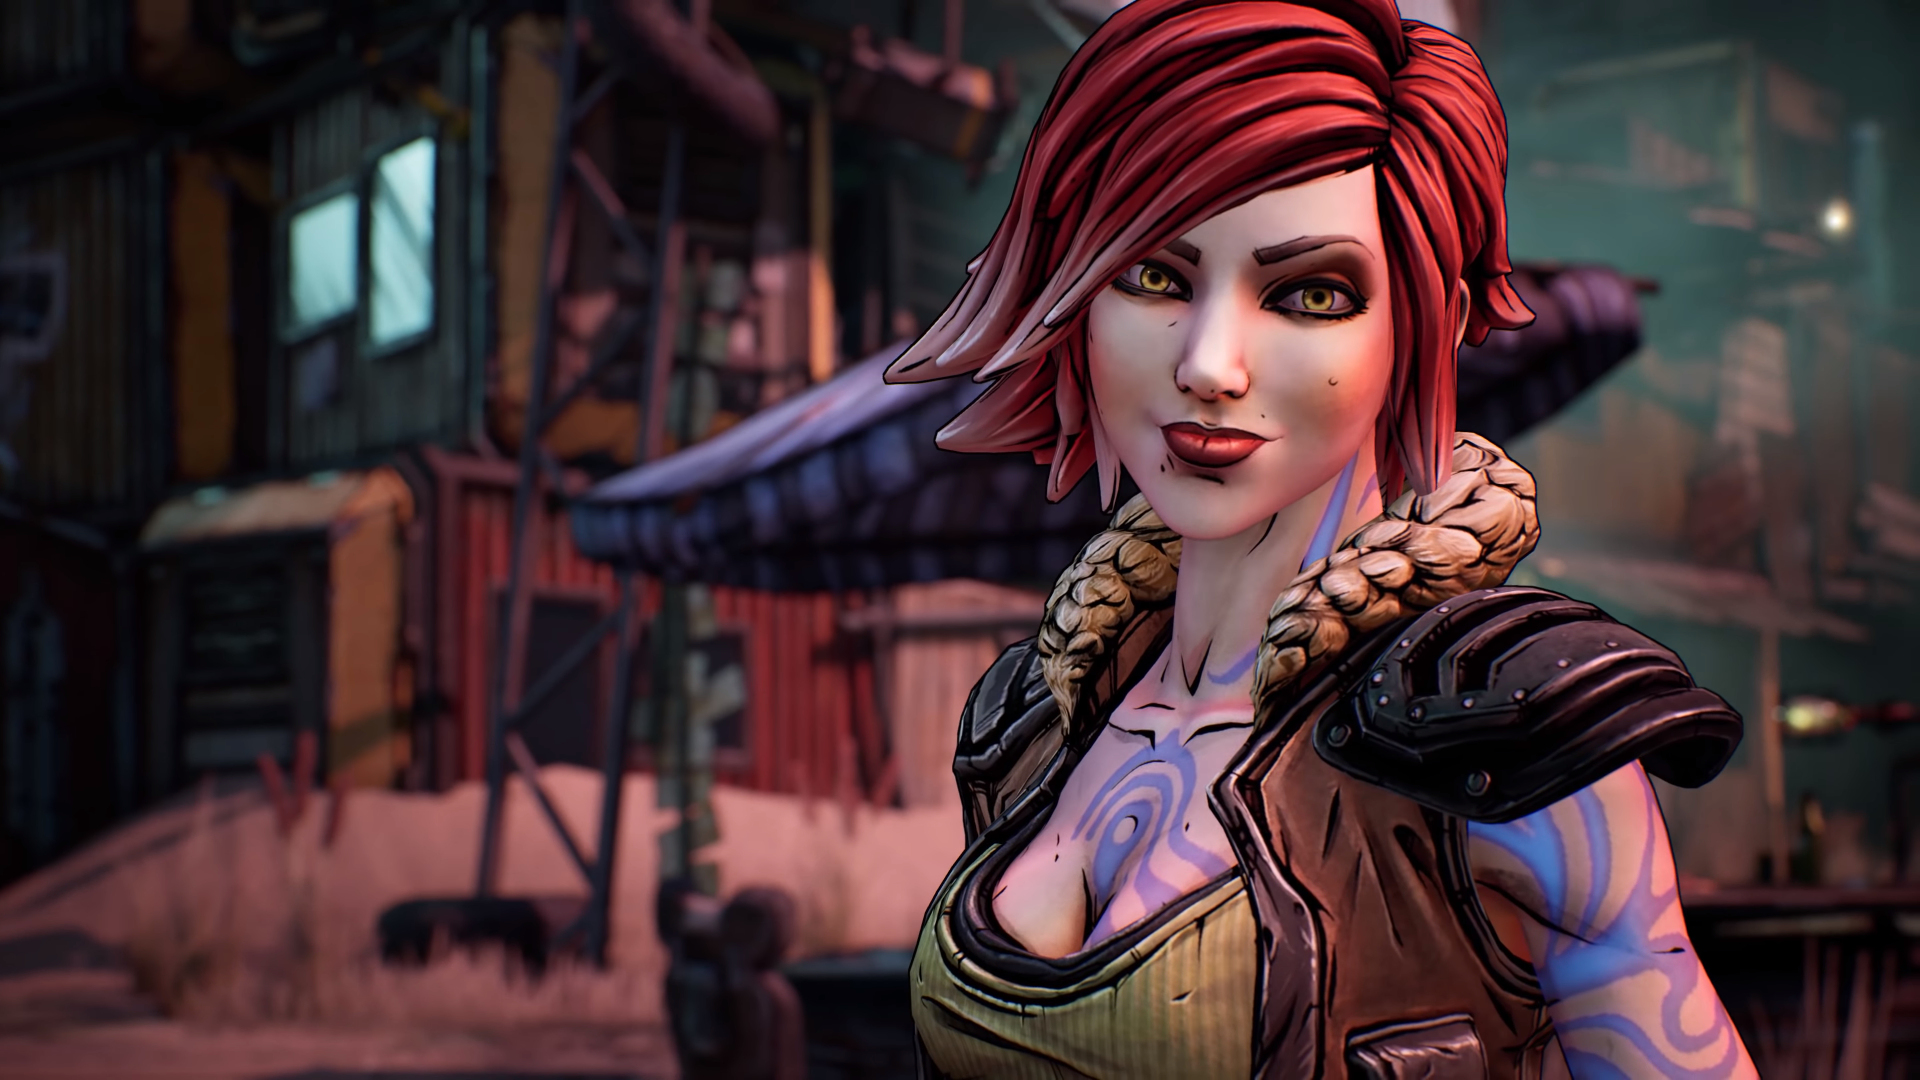 Borderlands: Game of the Year Edition Enhanced